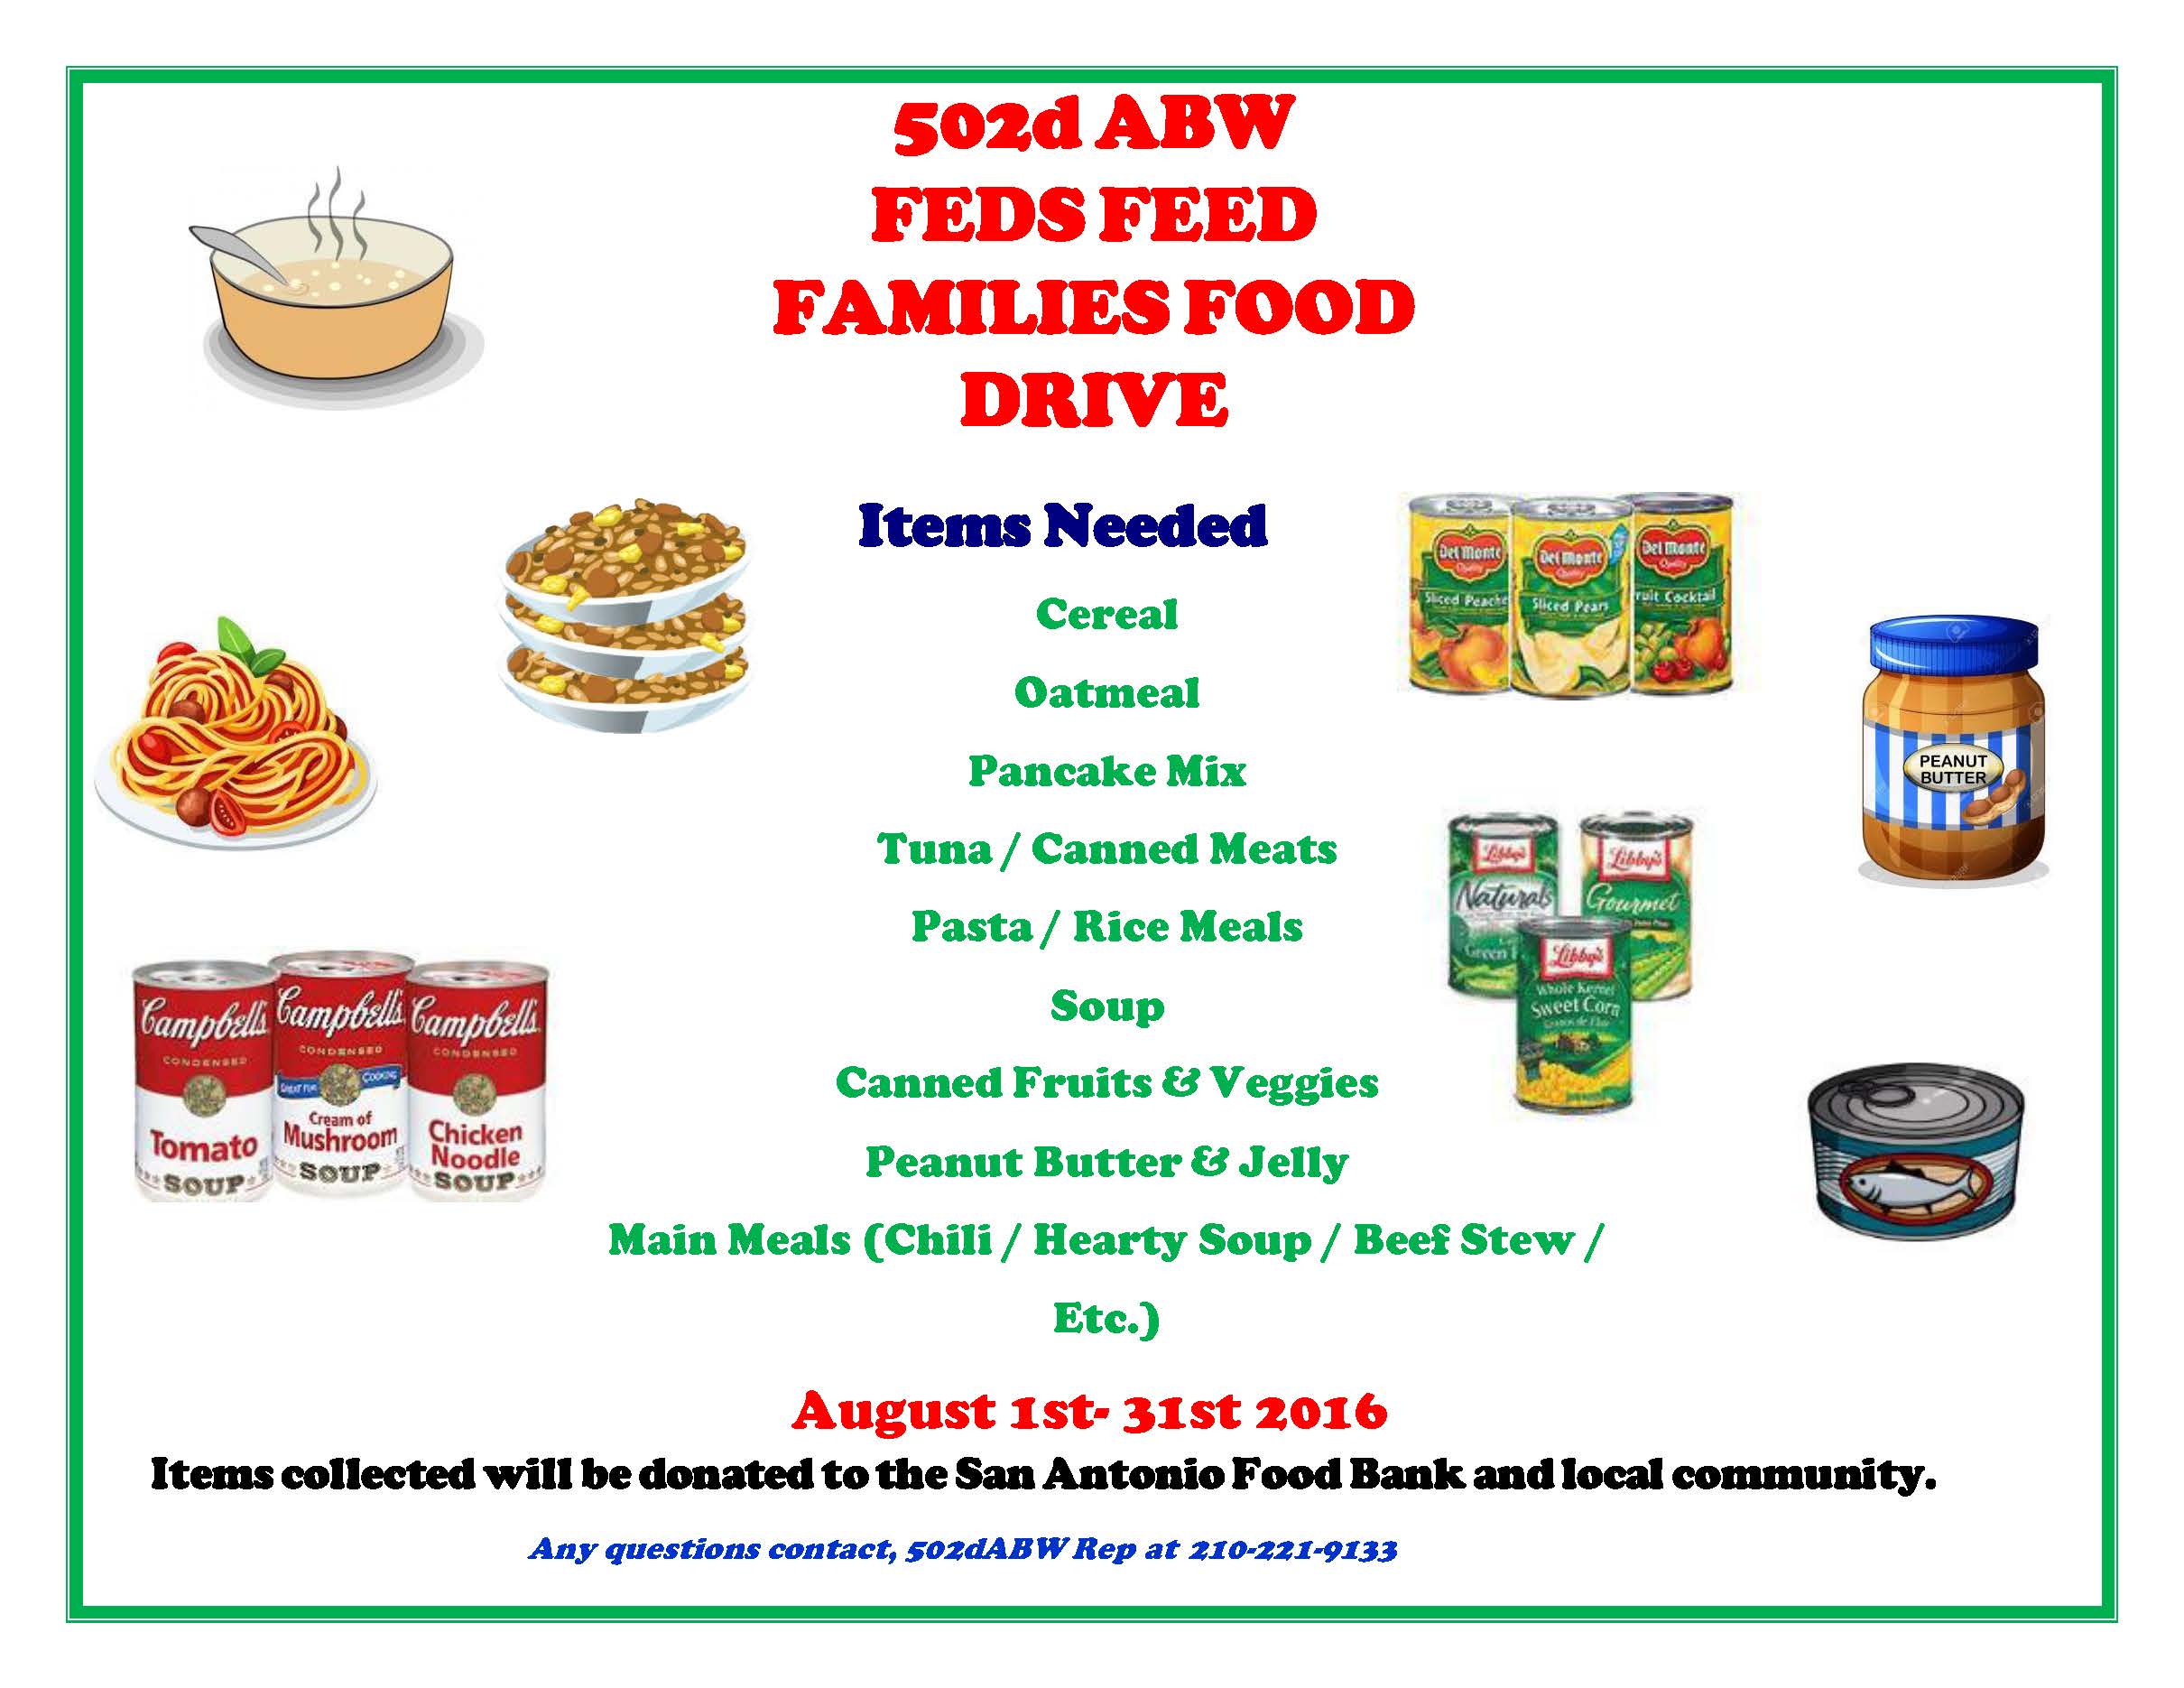 Feds Feed Families Food Drive